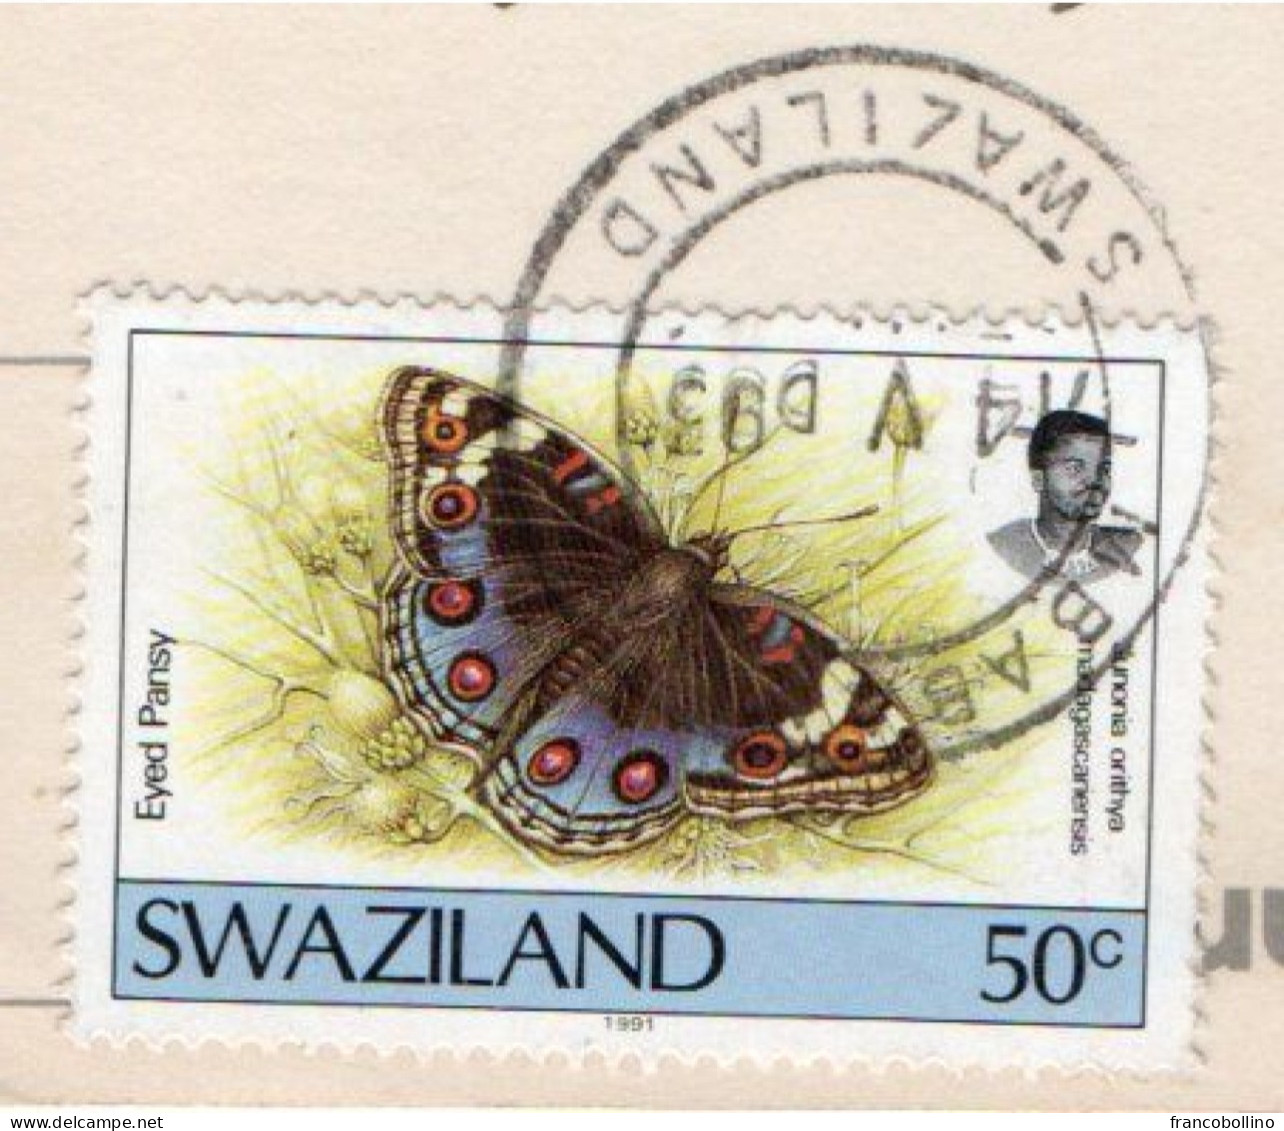 SWAZILAND - FLOWERS / THEMATIC STAMP-BUTTERFLY - Swaziland